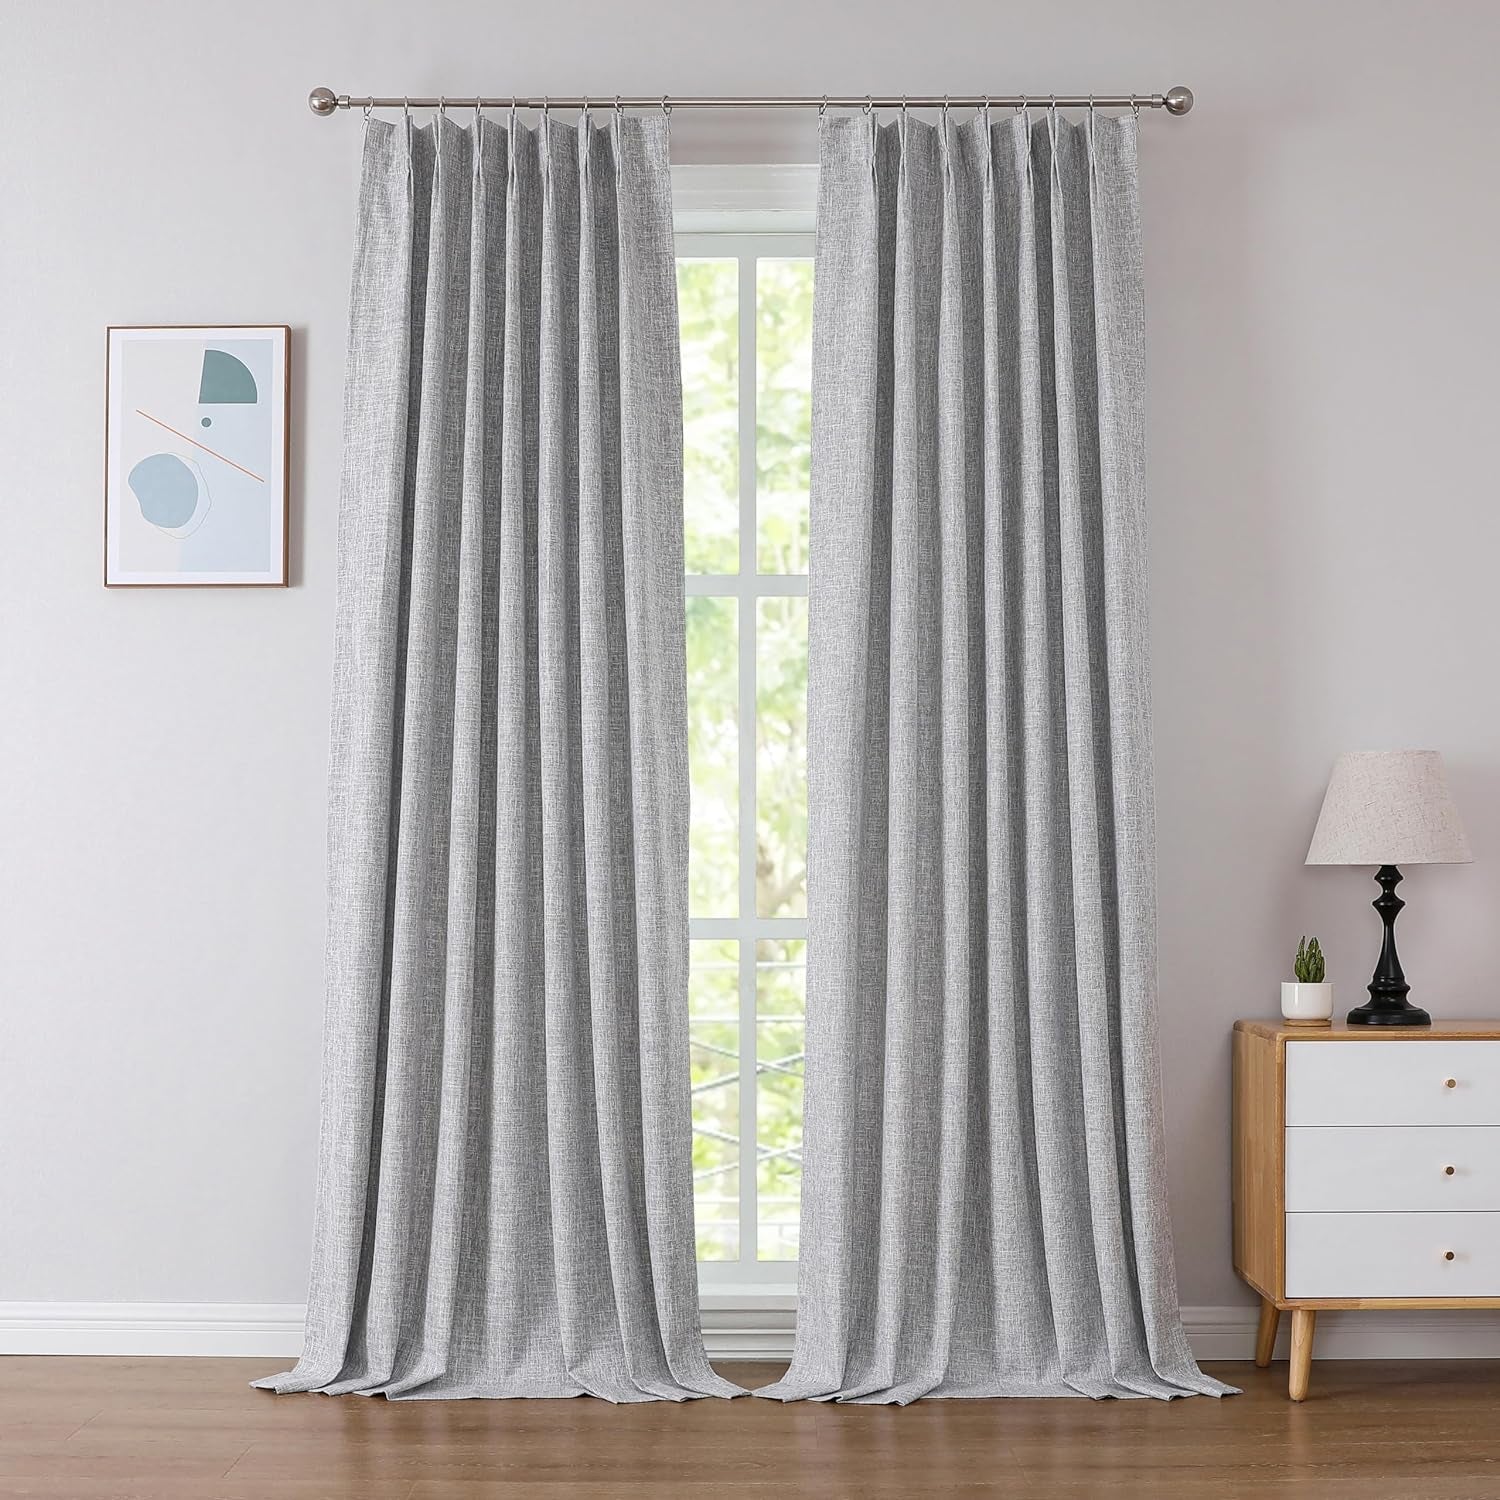 Kayne Studio Blended Linen Pinch Pleat Blackout Curtains 84 Inch Long for Living Room Bedroom,Thermal Insulated Window Treatments Pleated Drapes for Track with 9 Hooks,40"X84",Dark Linen,1 Panel  Kayne Studio Grey 40"X95"X1 